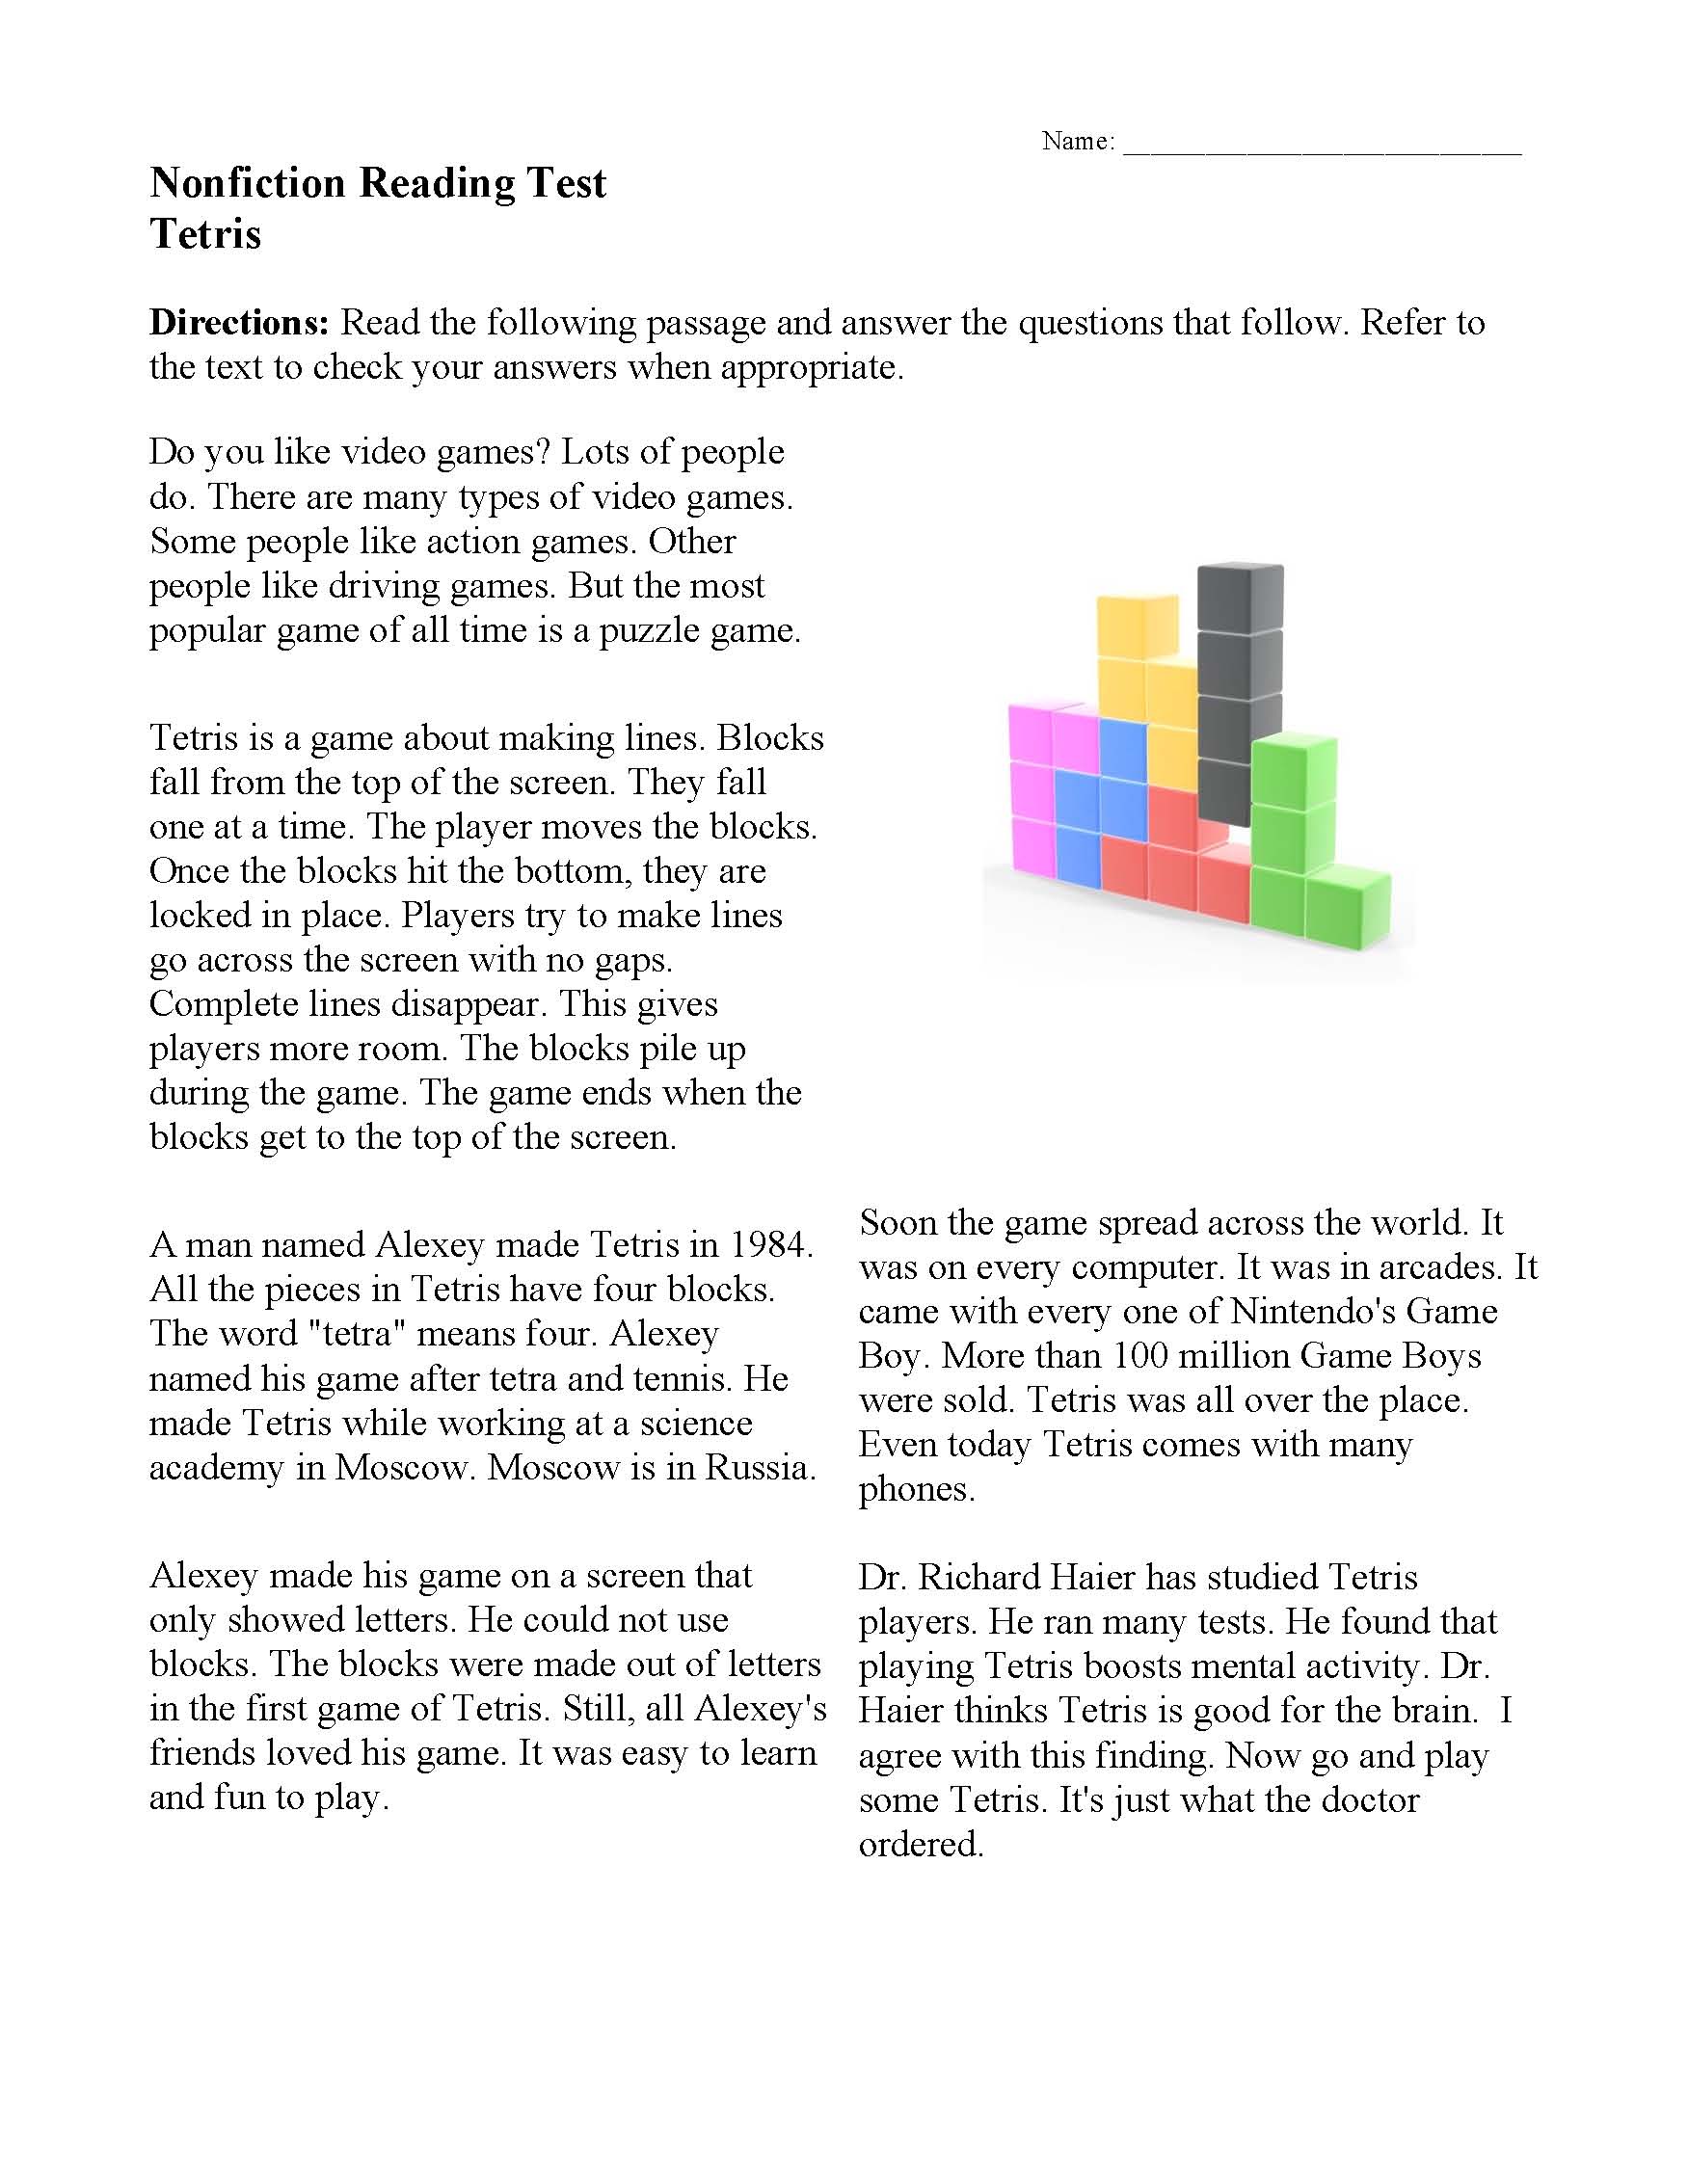 This is a preview image of Tetris. Click on it to enlarge it or view the source file.